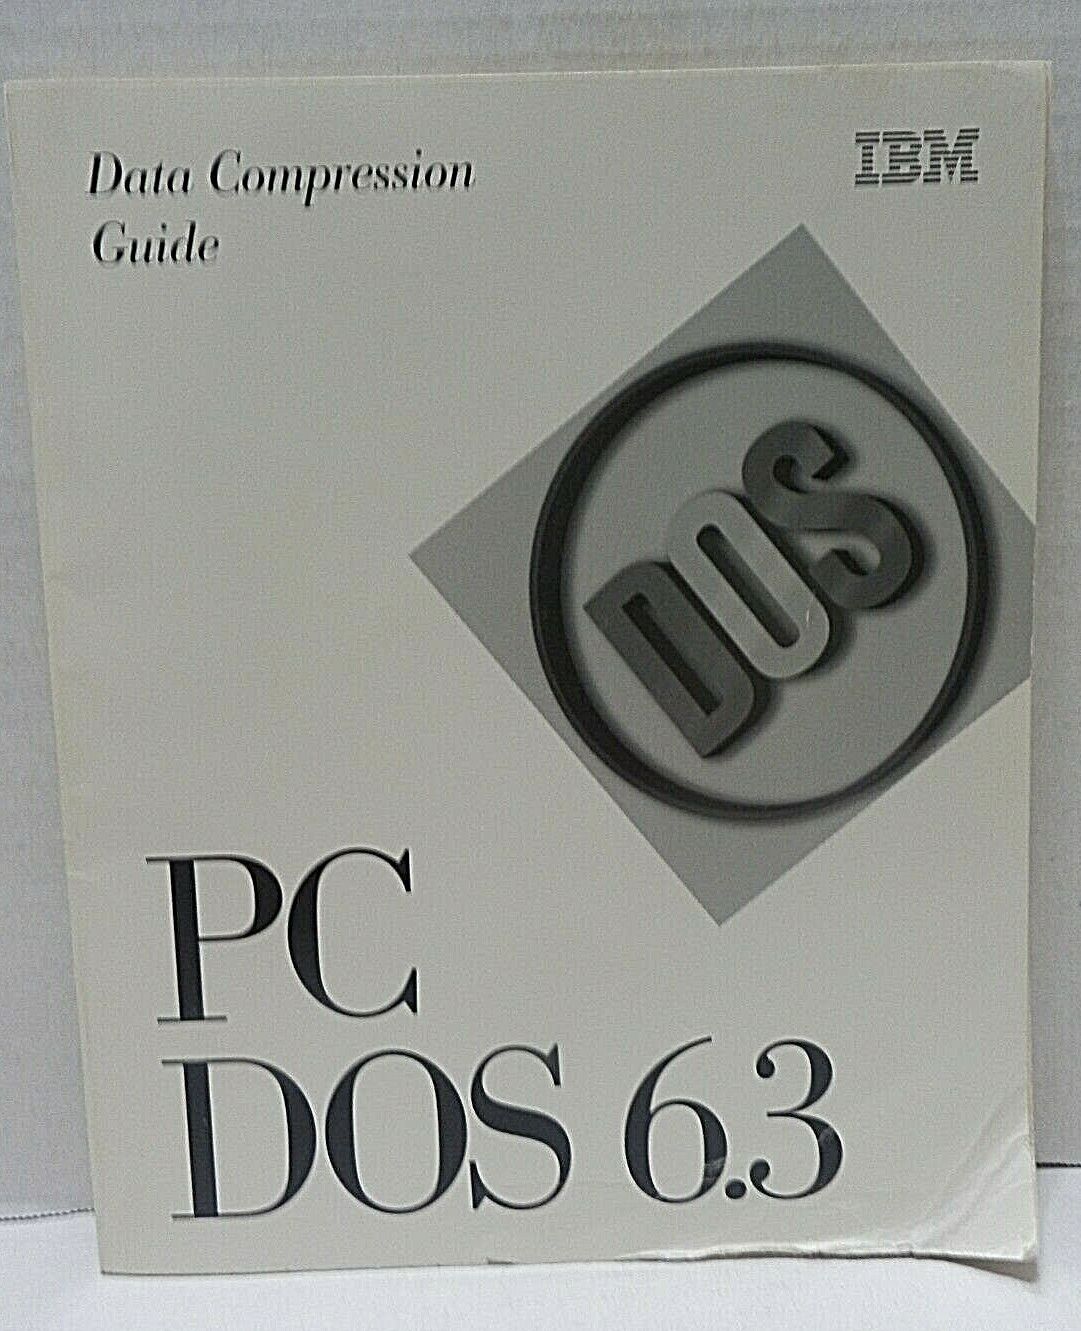 Vintage IBM PC DOS 6.3 1994 Data Compression Manual Guide Only Computer Manual